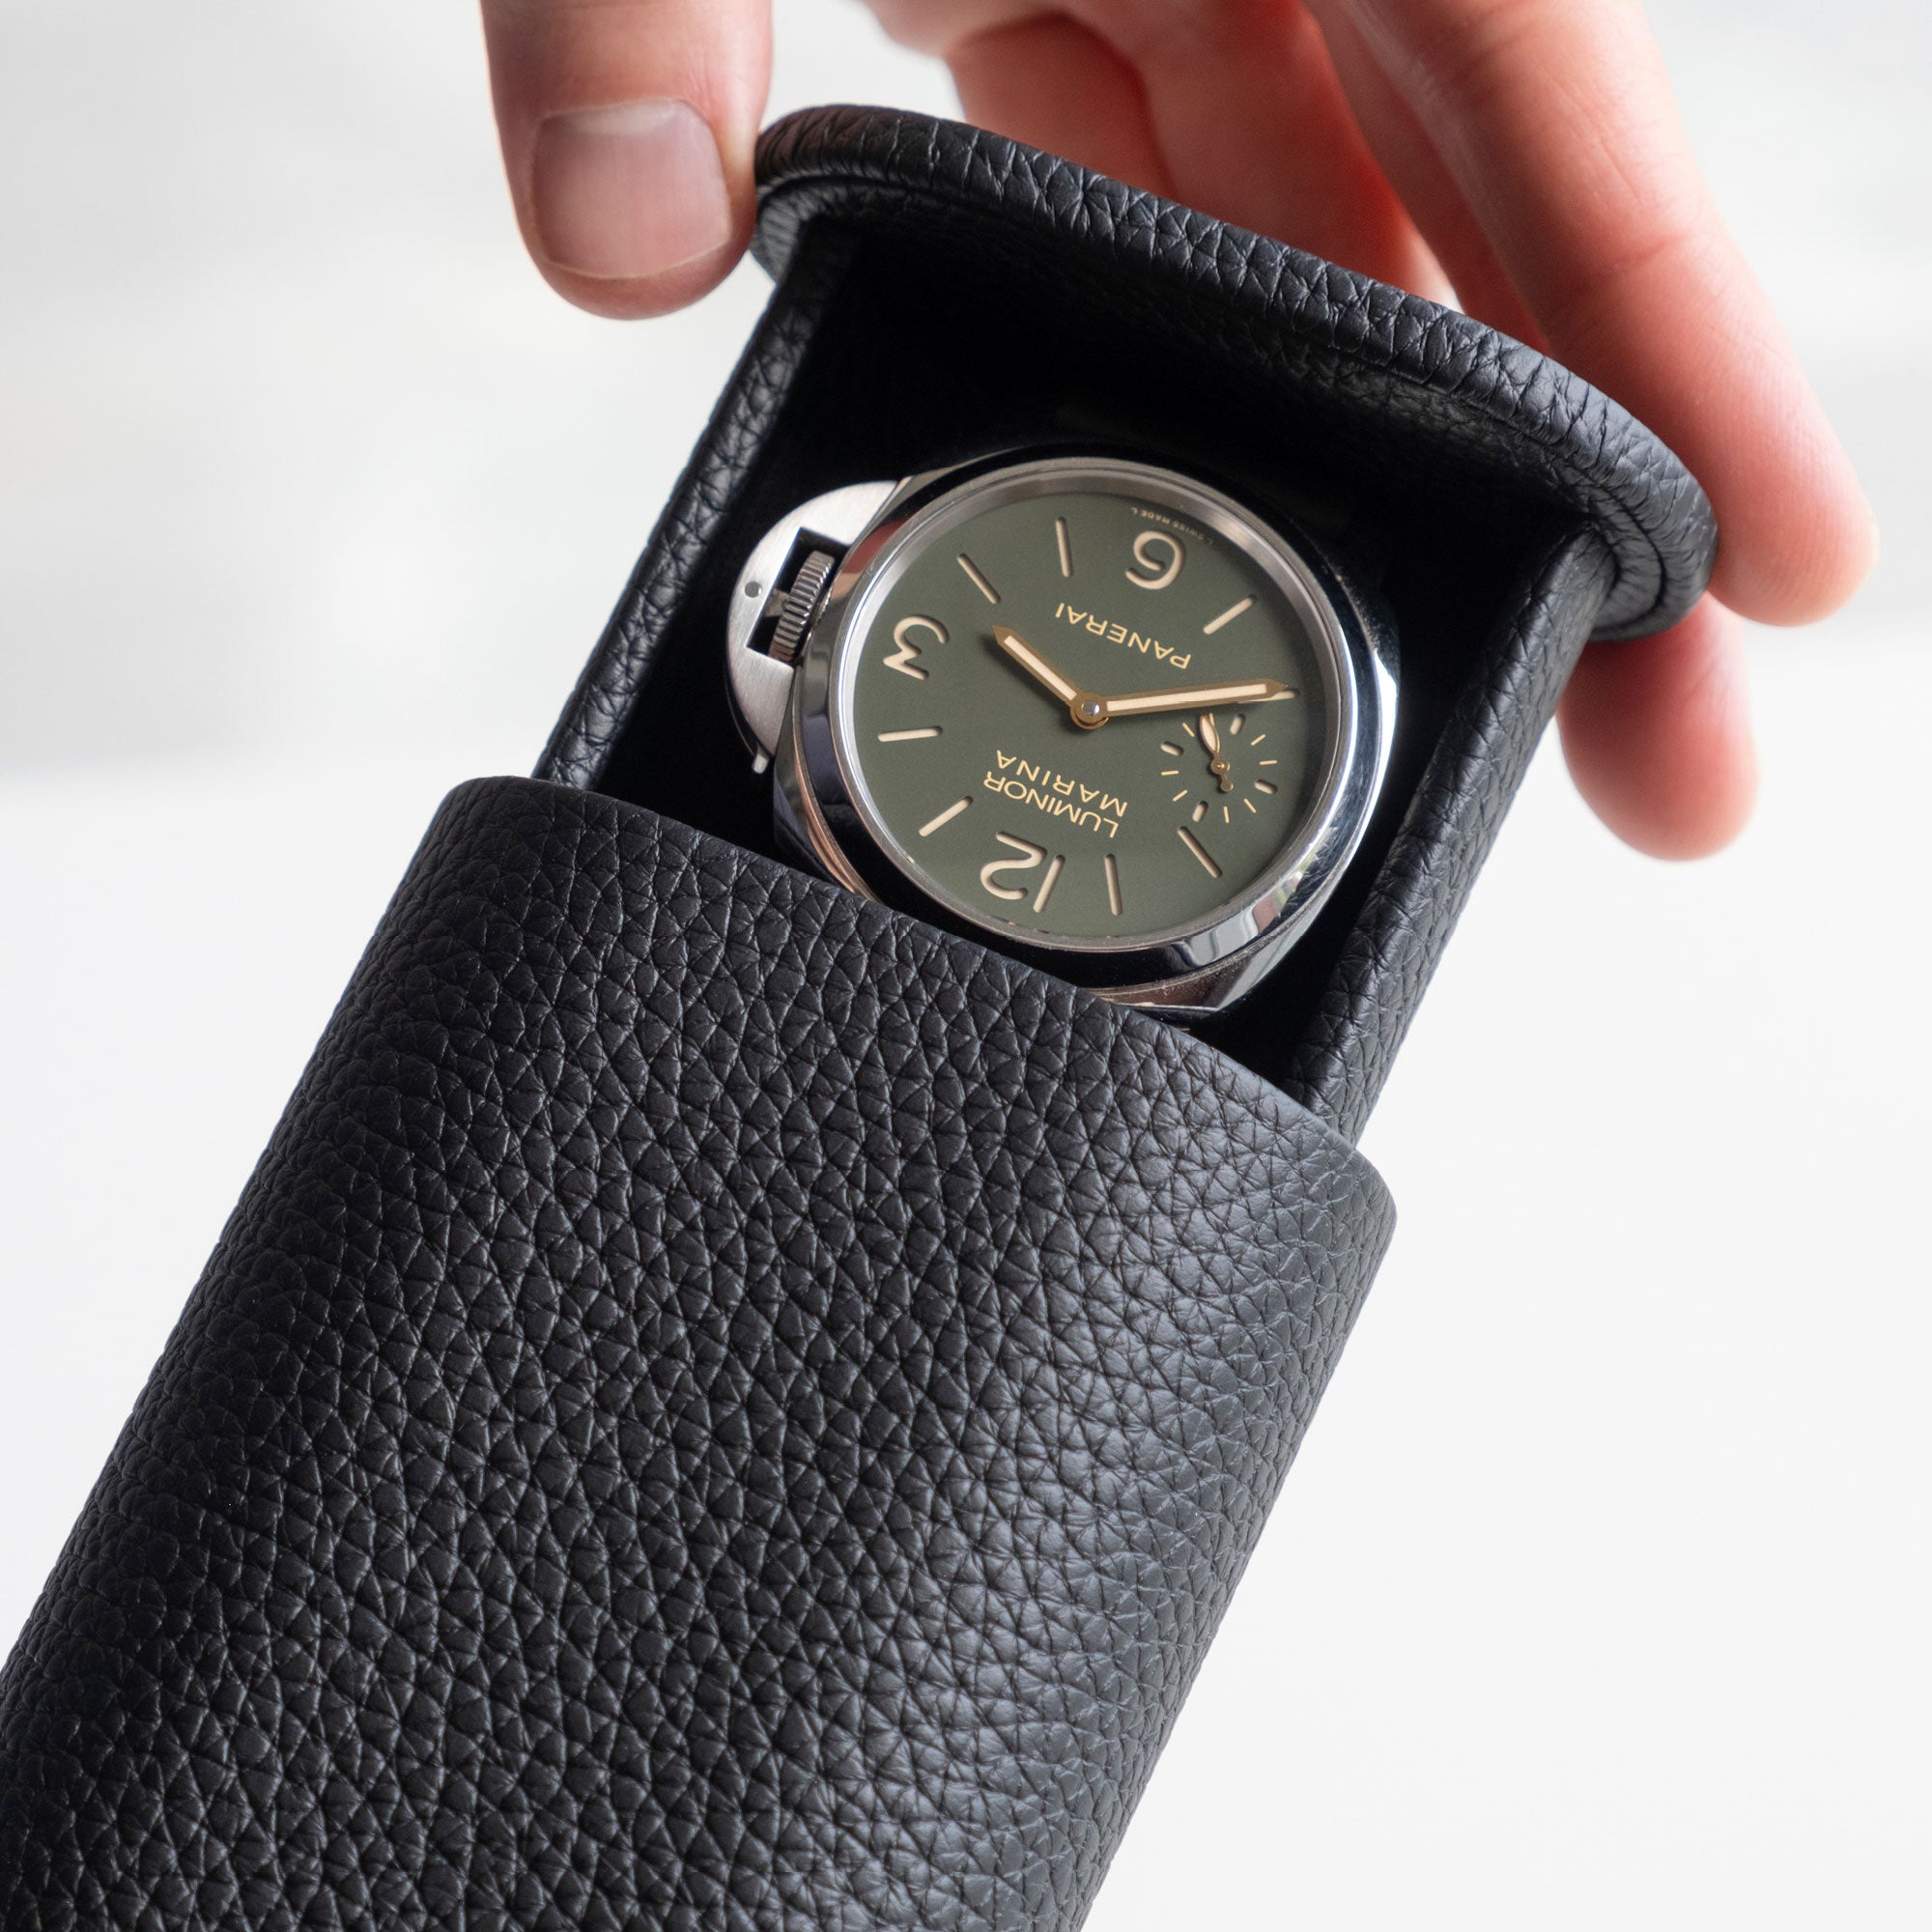 Detail photo of man opening the Oscar Tall Watch roll in black leather to reveal a Panerai watch held inside.